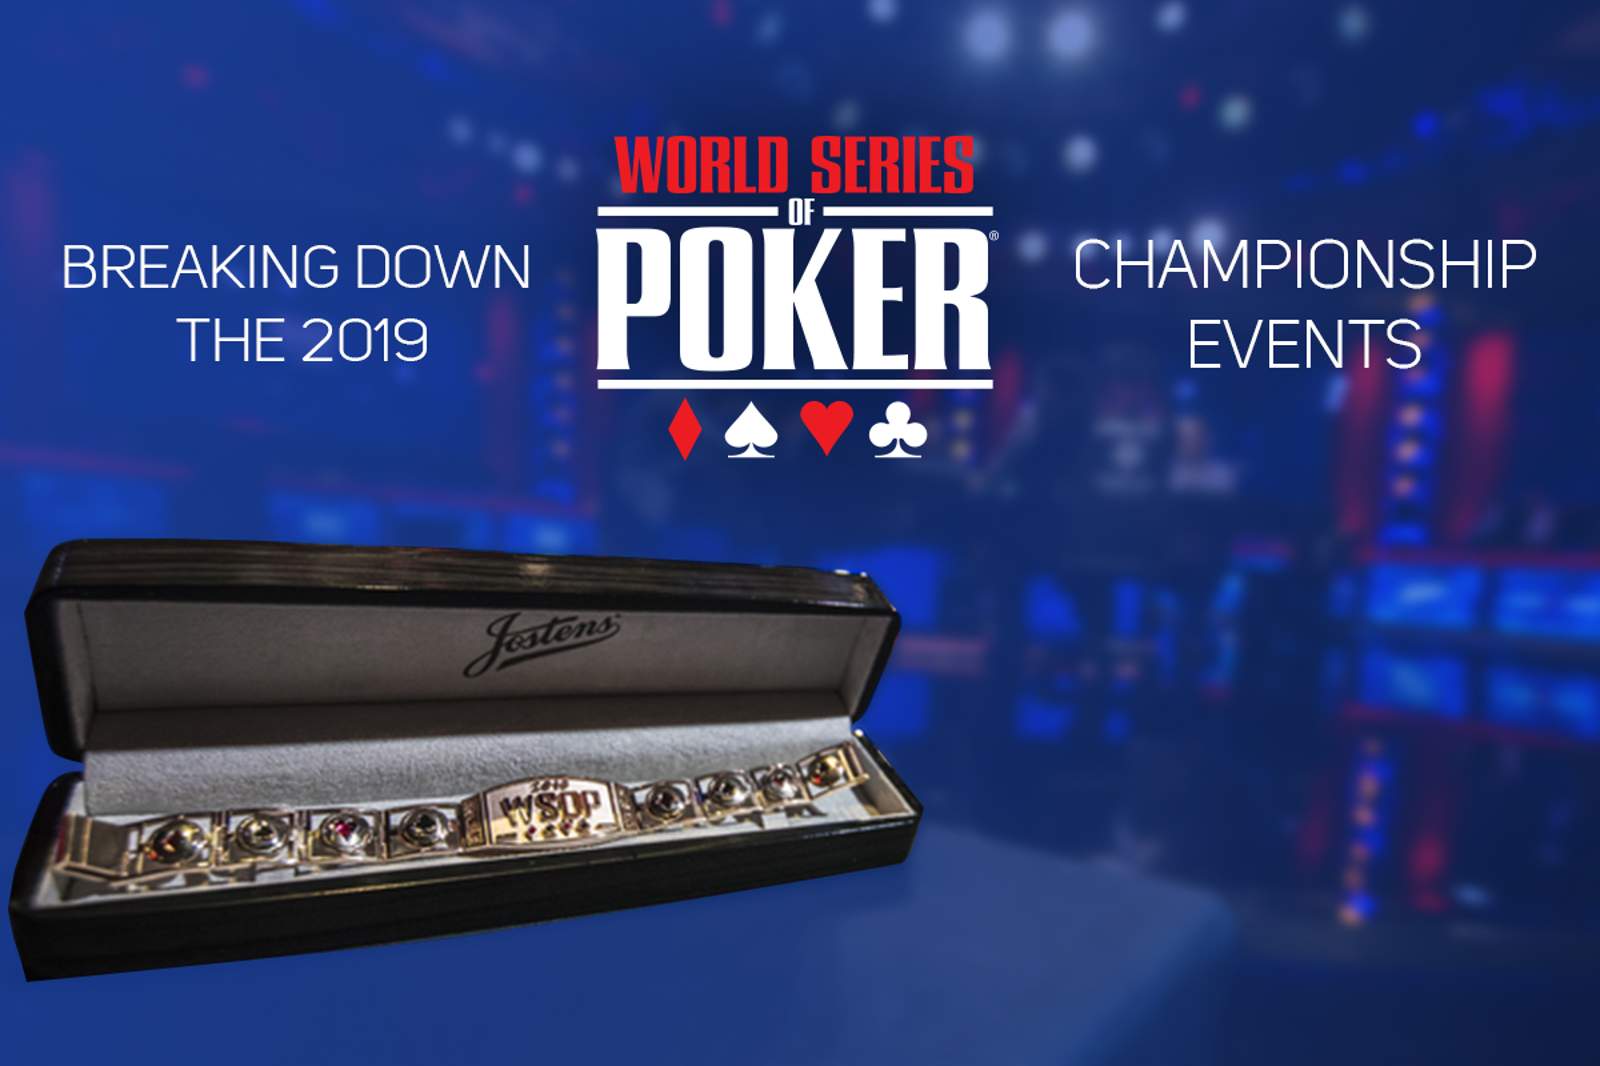 Breaking Down The 2019 World Series of Poker Championship Events